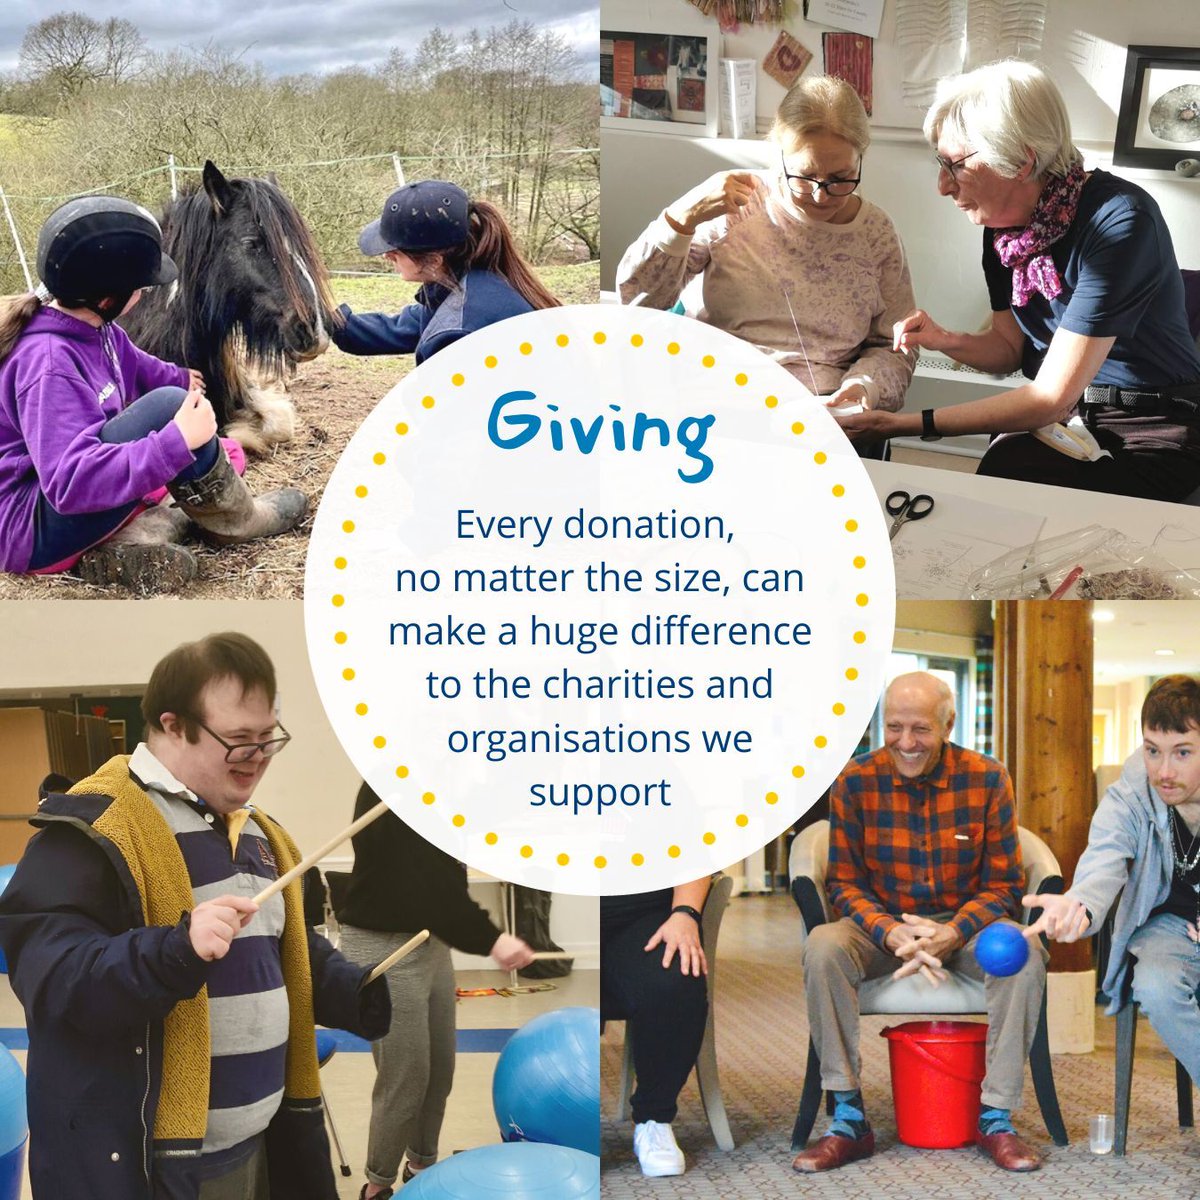 We connect people & companies with charities & organisations - helping those in need, whilst enabling donors to feel proud that they’ve made a real difference. Find out how you / your organisation could help local charities - buff.ly/2SZxUtV #Cheshire #CCF